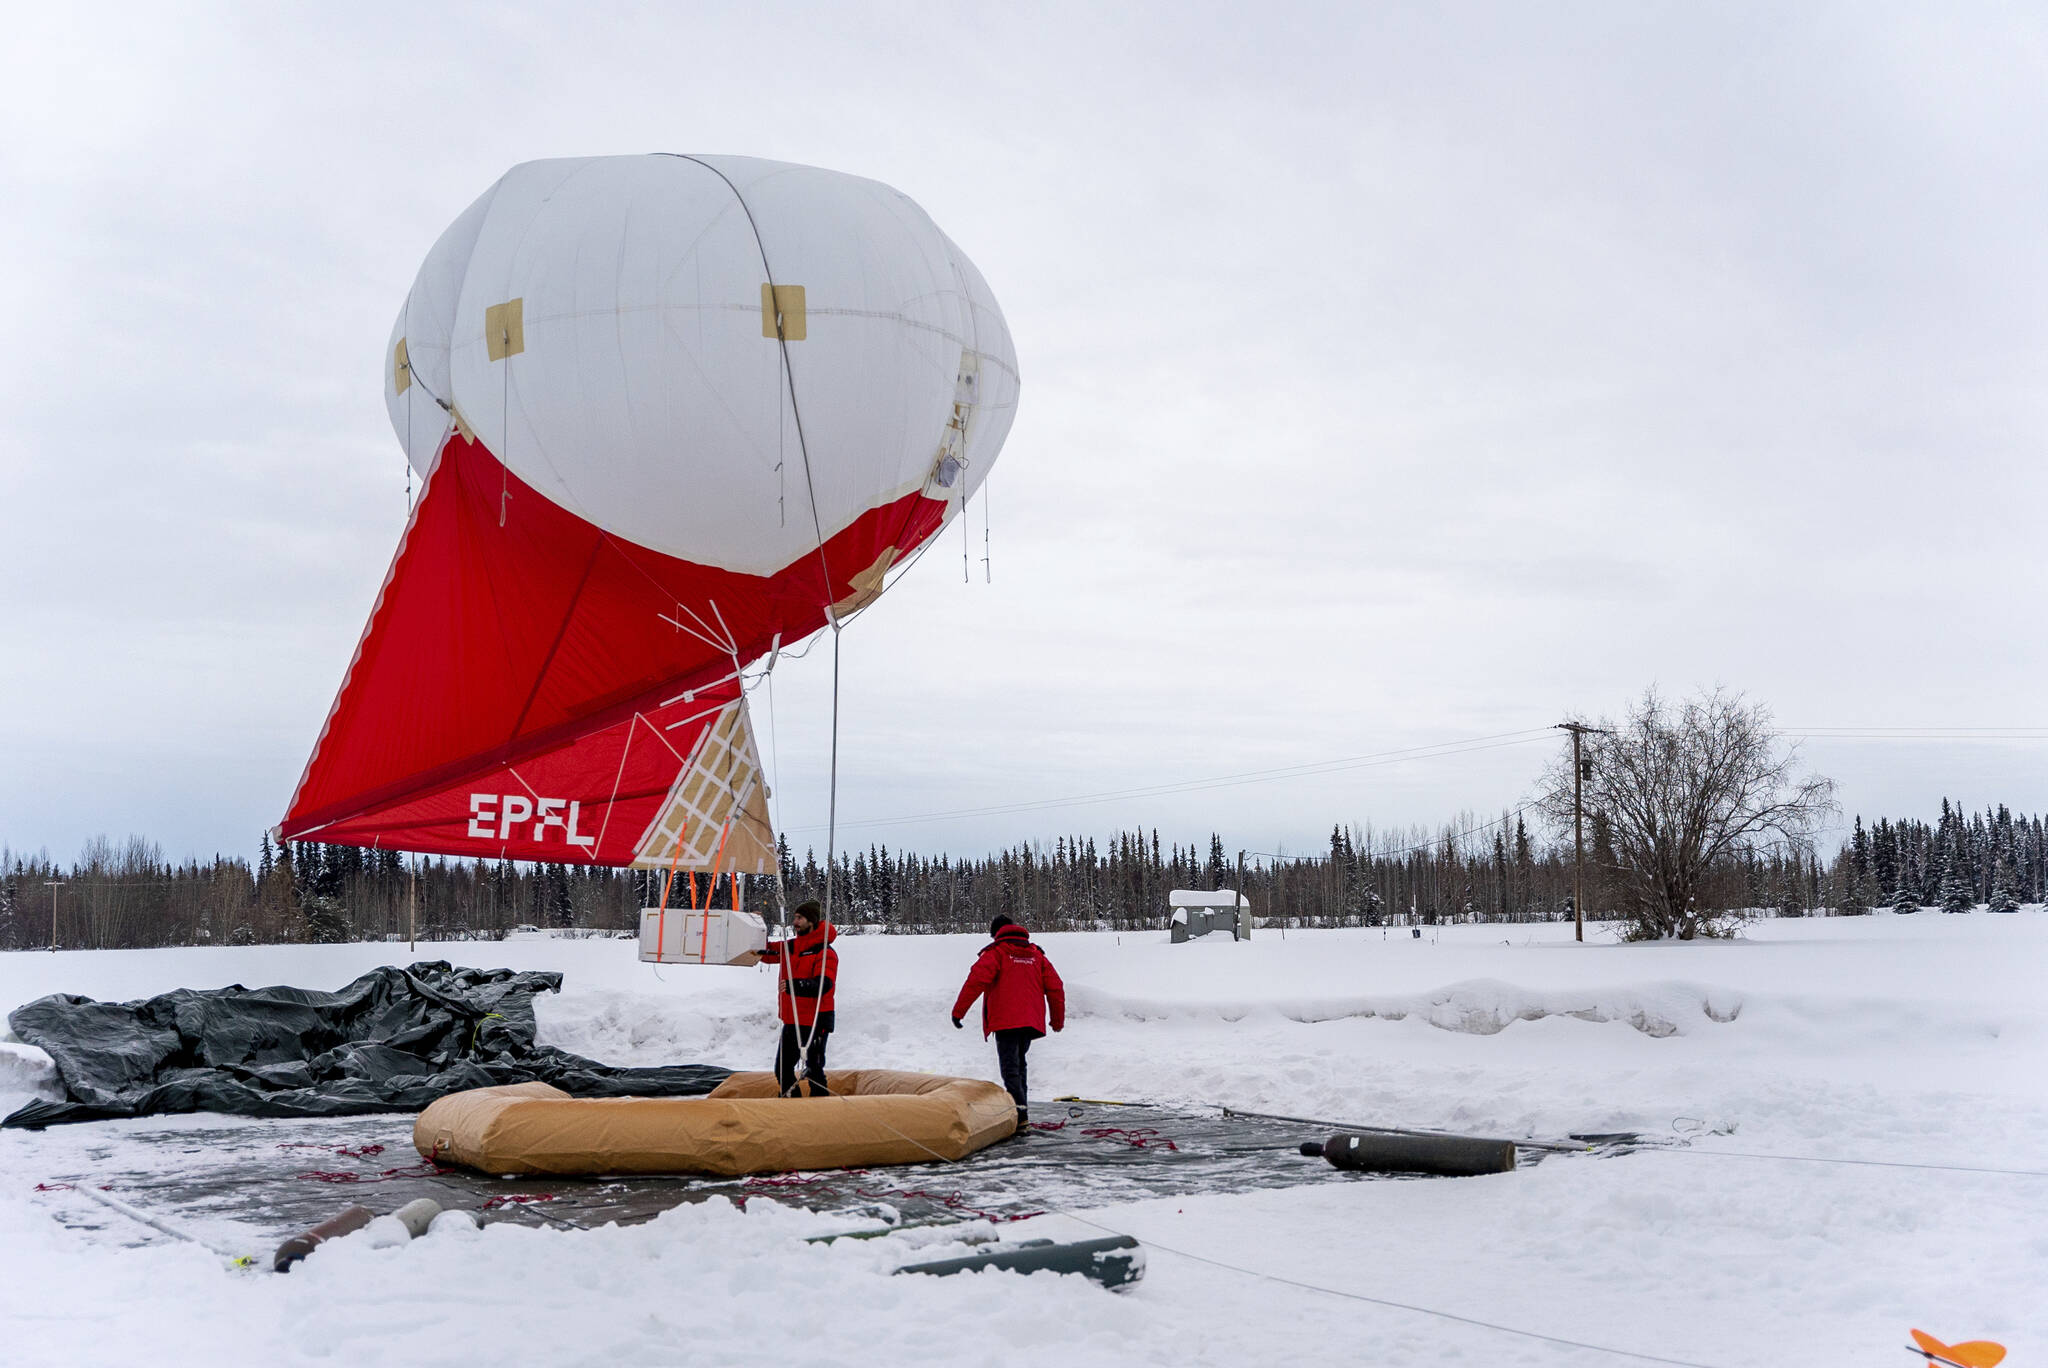 This Feb. 21, 2022, photo provided by the University of Alaska Fairbanks Geophysical Institute shows Swiss team members working with a tethered balloon and payload used to measure different characteristics of aerosols and trace gases in the atmosphere over Fairbanks, Alaska. Over seven weeks this winter, nearly 50 scientists from the continental U.S. and Europe descended on Fairbanks to study the sources of air pollution. (Daniel Walker/University of Alaska Fairbanks Geophysical Institute via AP)